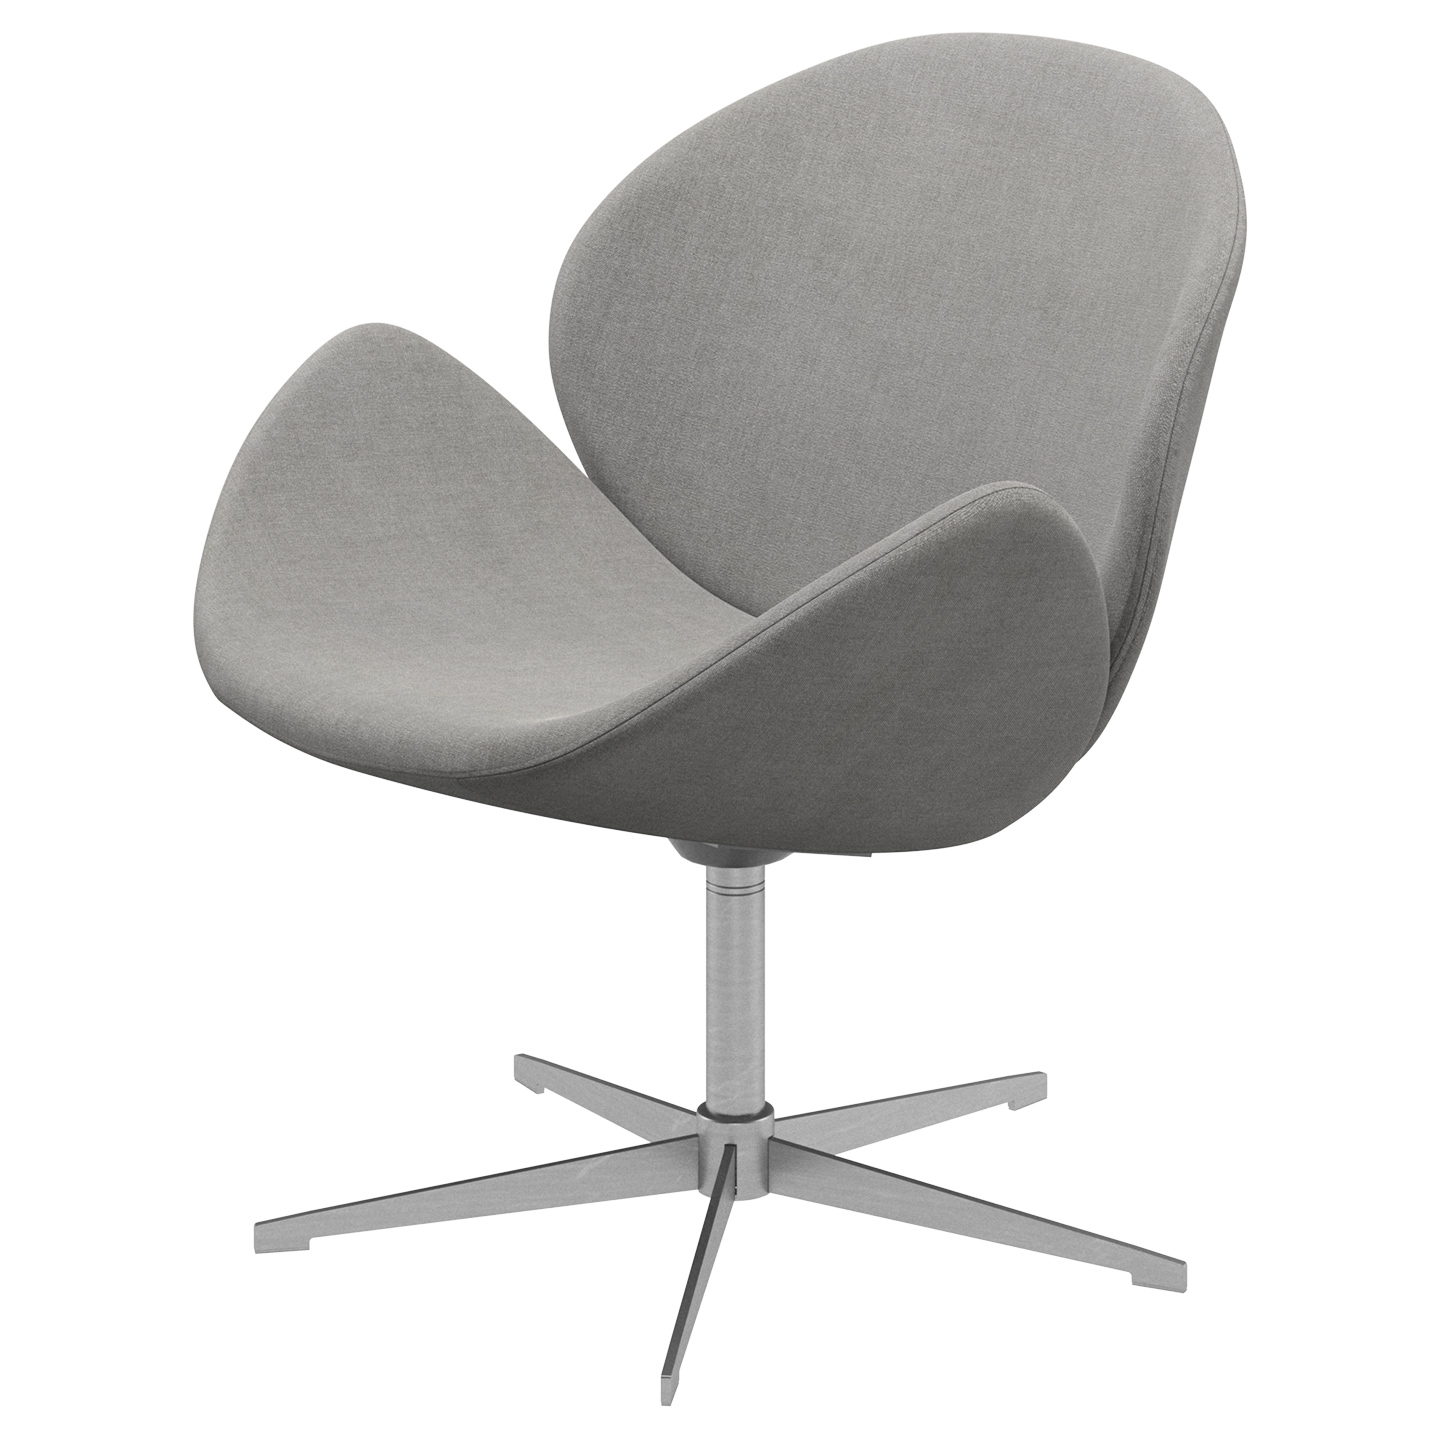 Ogi lounge chair from BoConcept